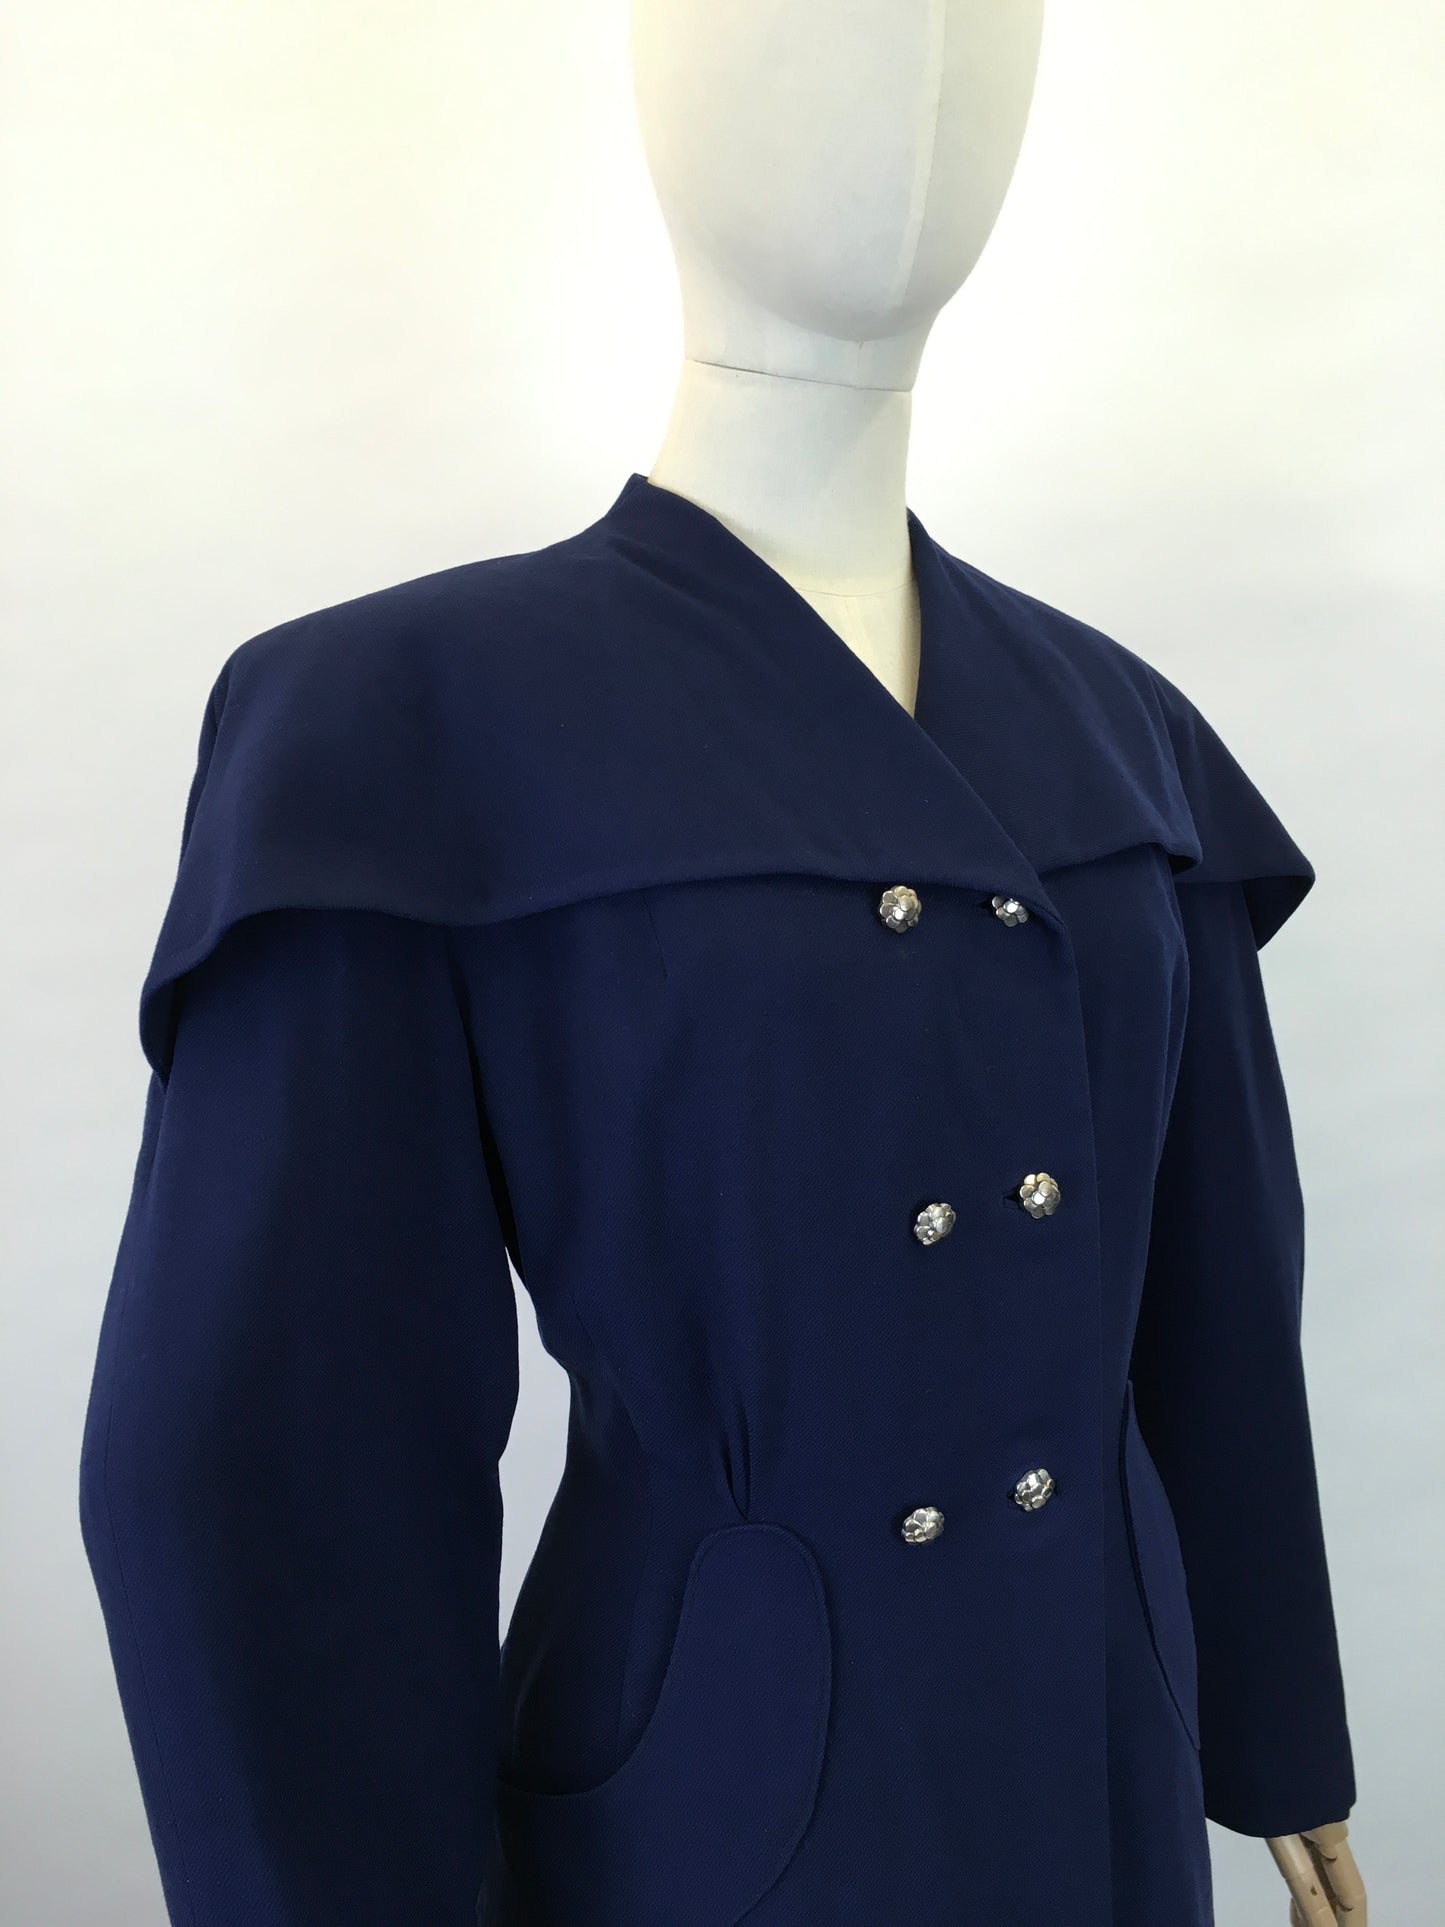 Original 1940s STUNNING Navy 2 pc Suit - With PHENOMENAL Long Line Silhouette and Cape Style Overlay